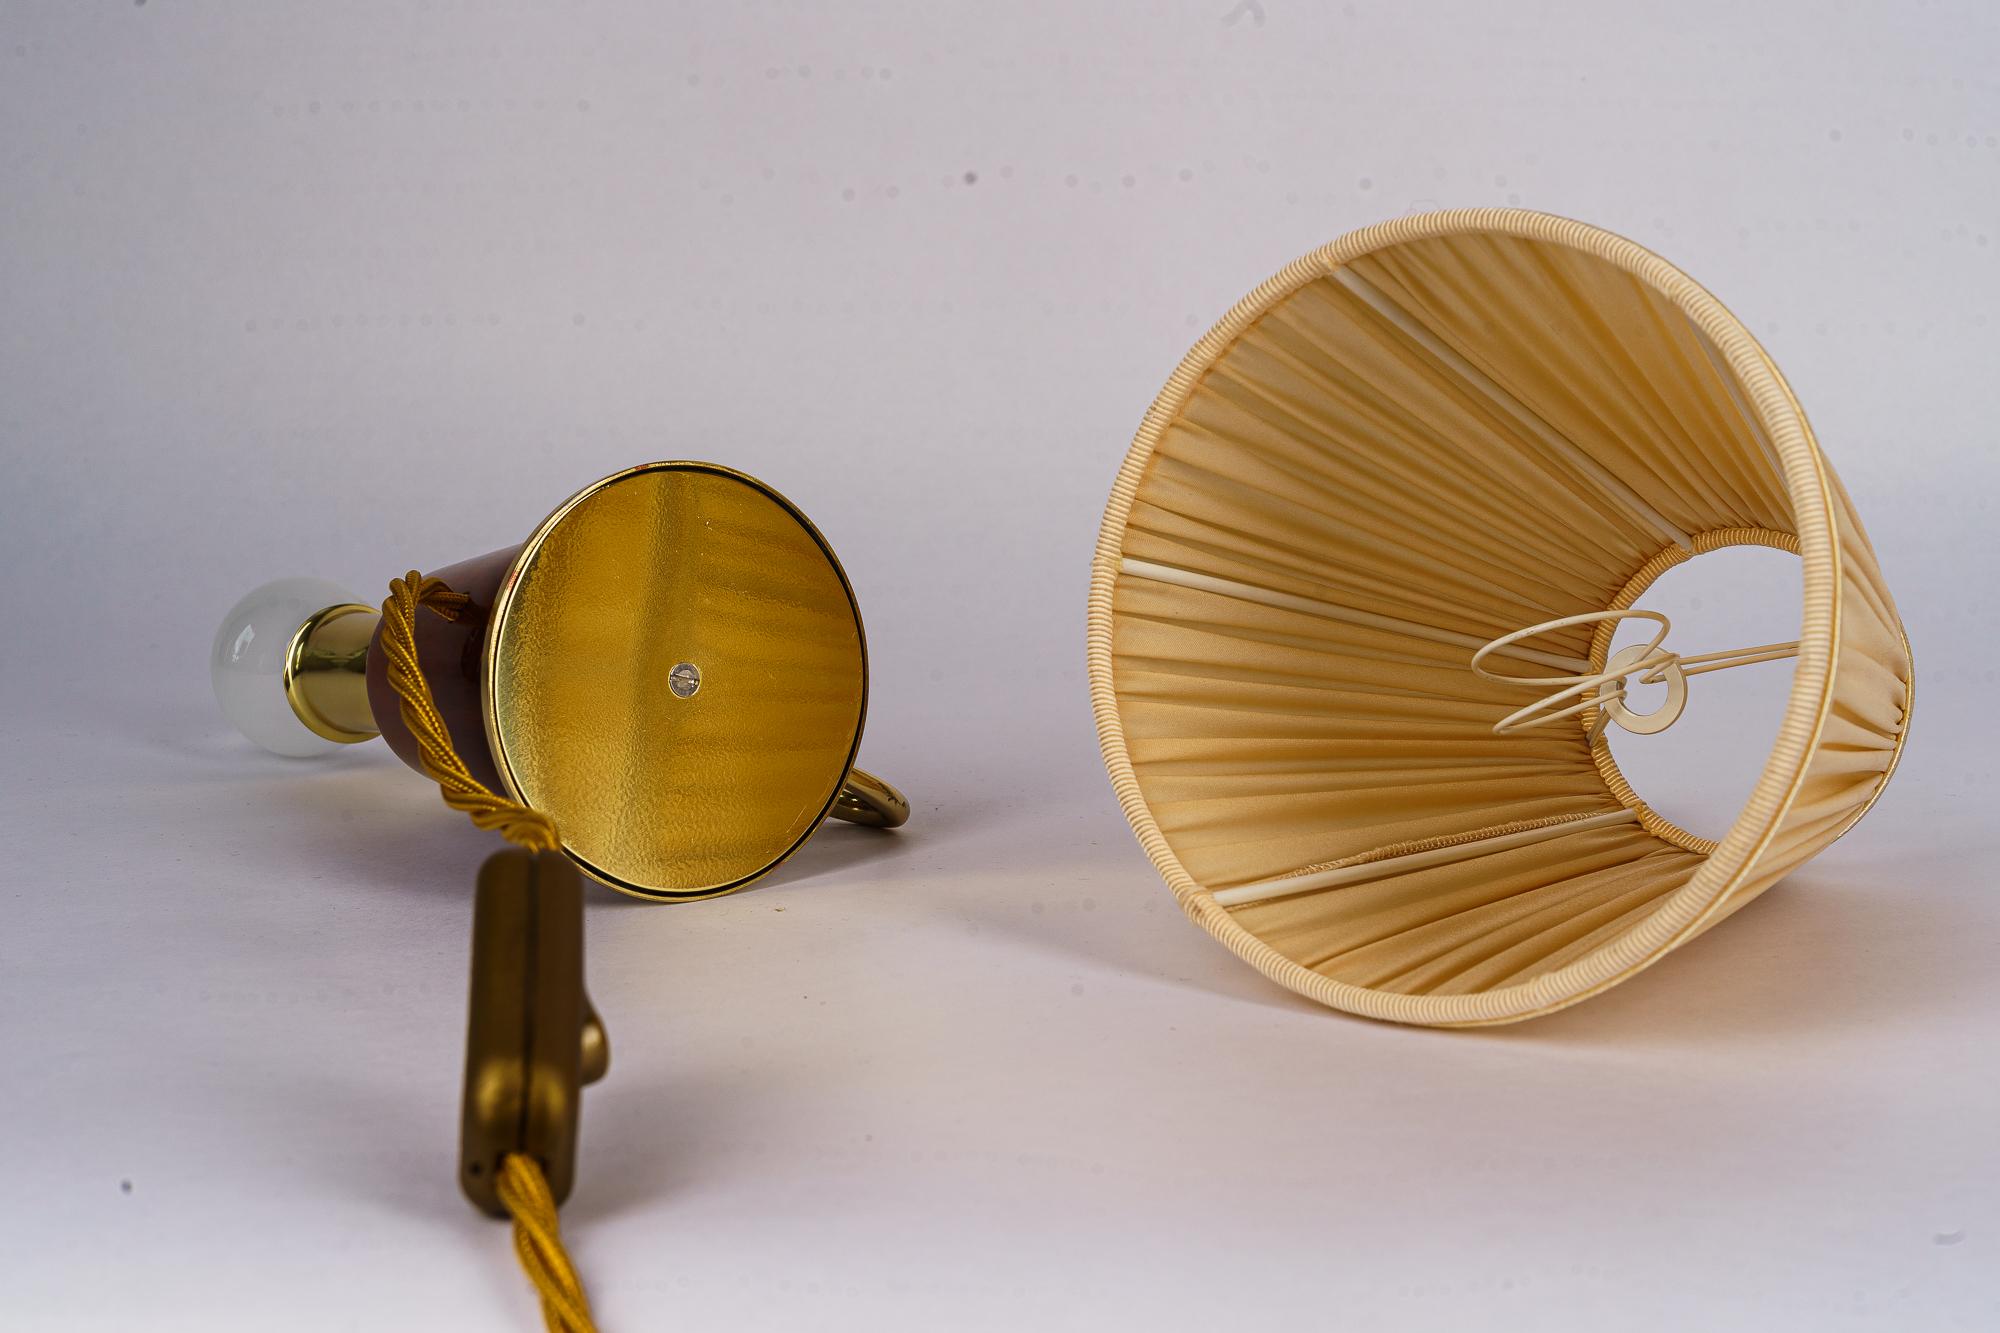 Rupert nikoll cherry wood table lamp with fabric shade vienna around 1950s For Sale 5